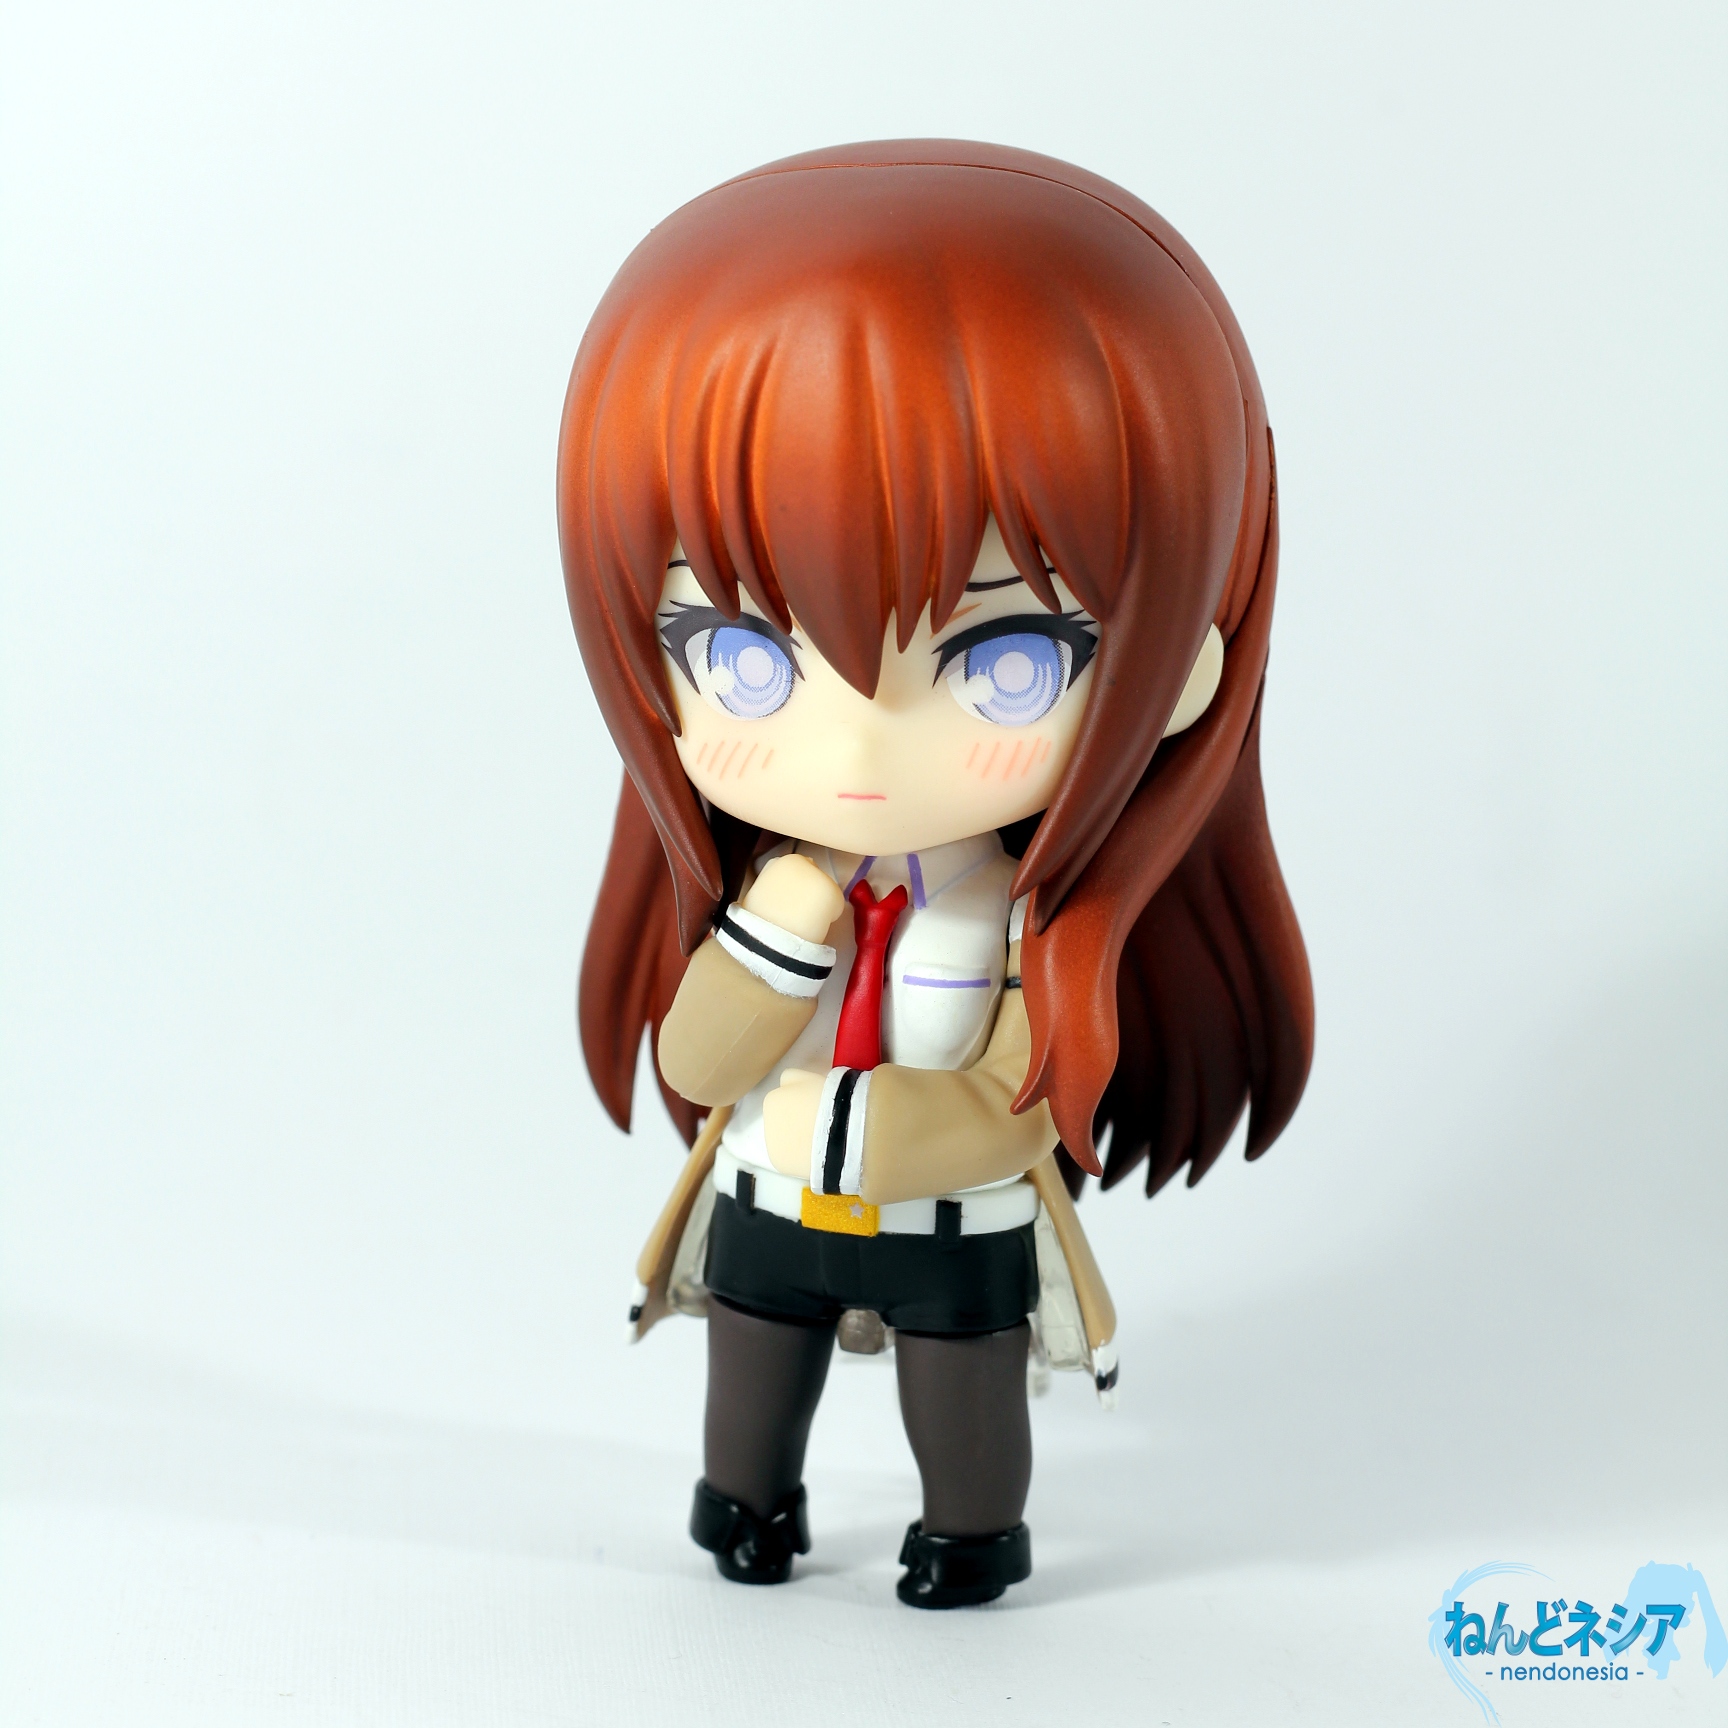 an anime toy is posed on a white surface